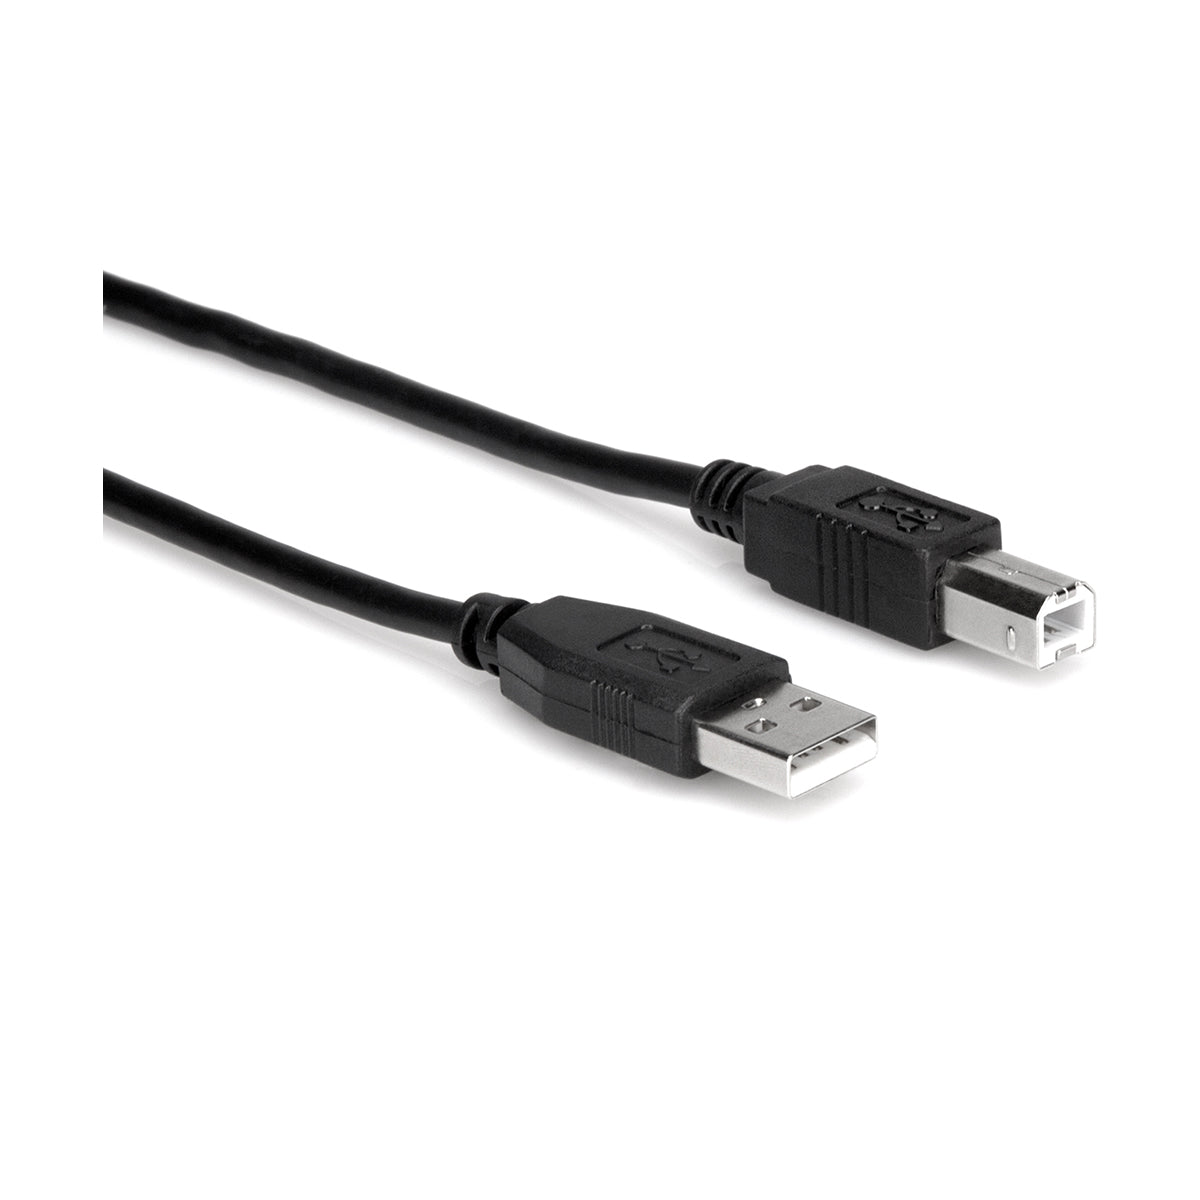 Hosa USB 2.0 Cable 5’ Type A-B